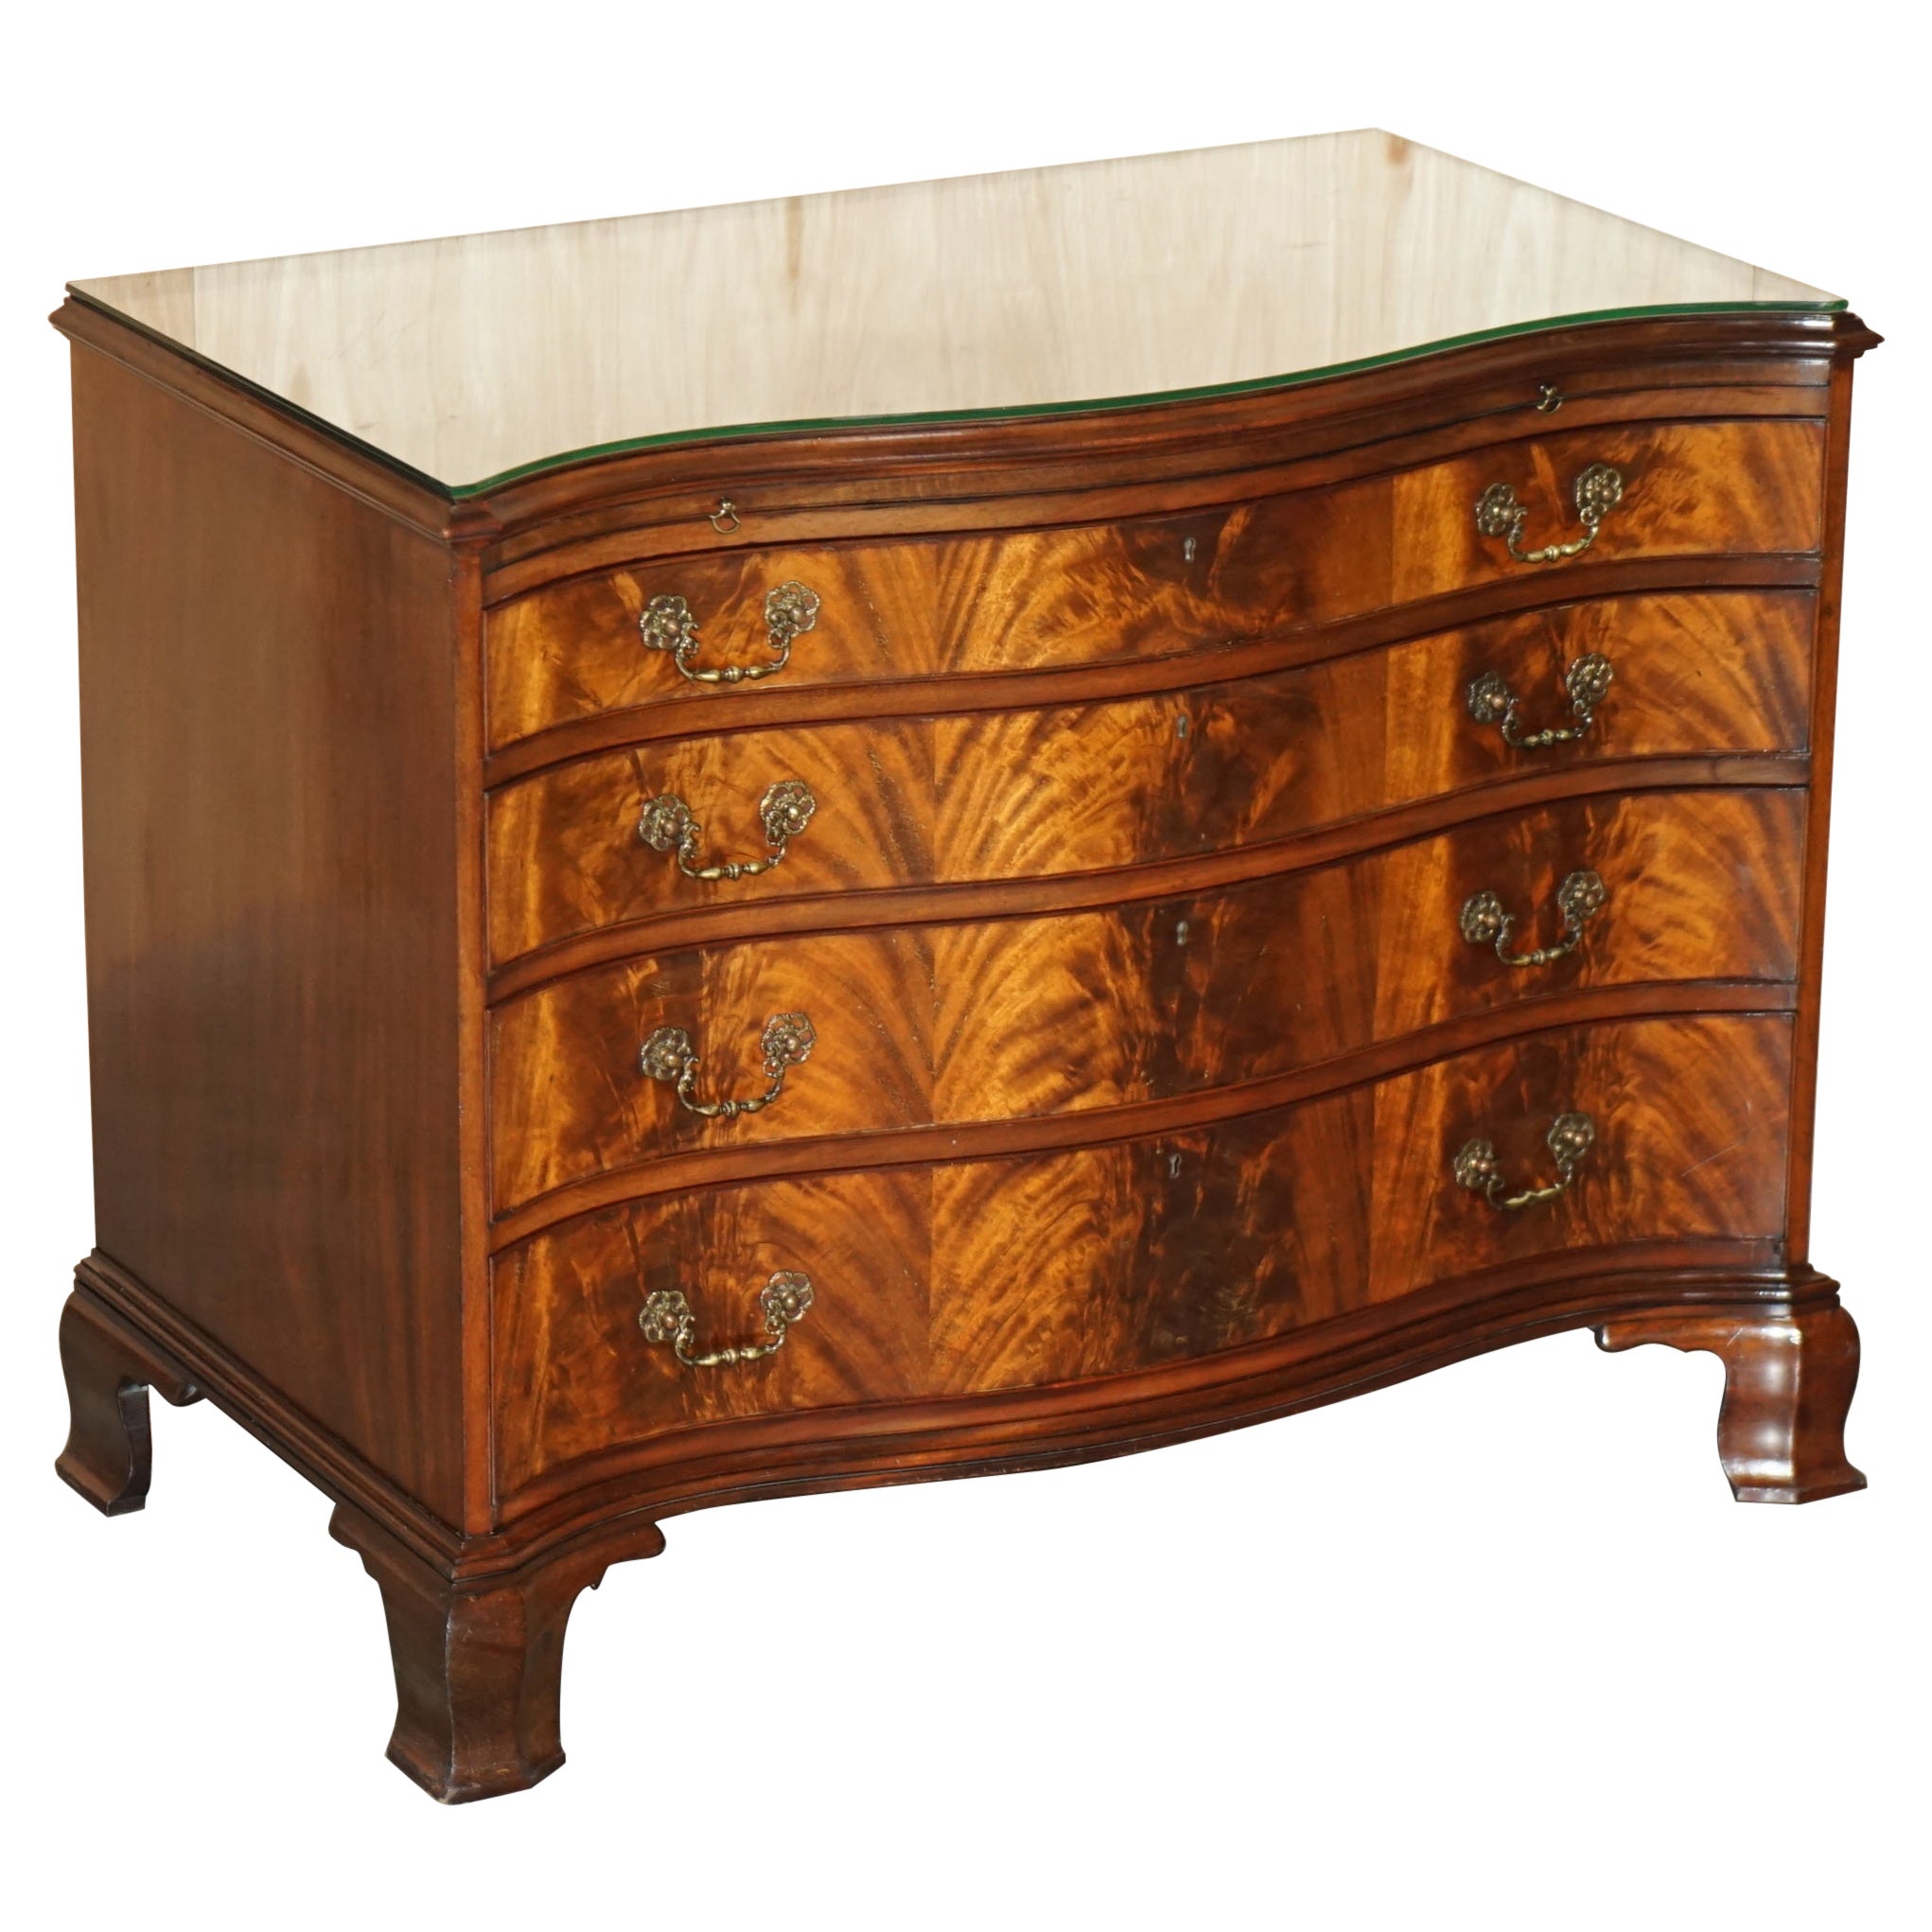 STUNNING FLAMED HARDWOOD HOWARD & SON'S SERPENTINE FRONTED CHEST OF DRAWERs